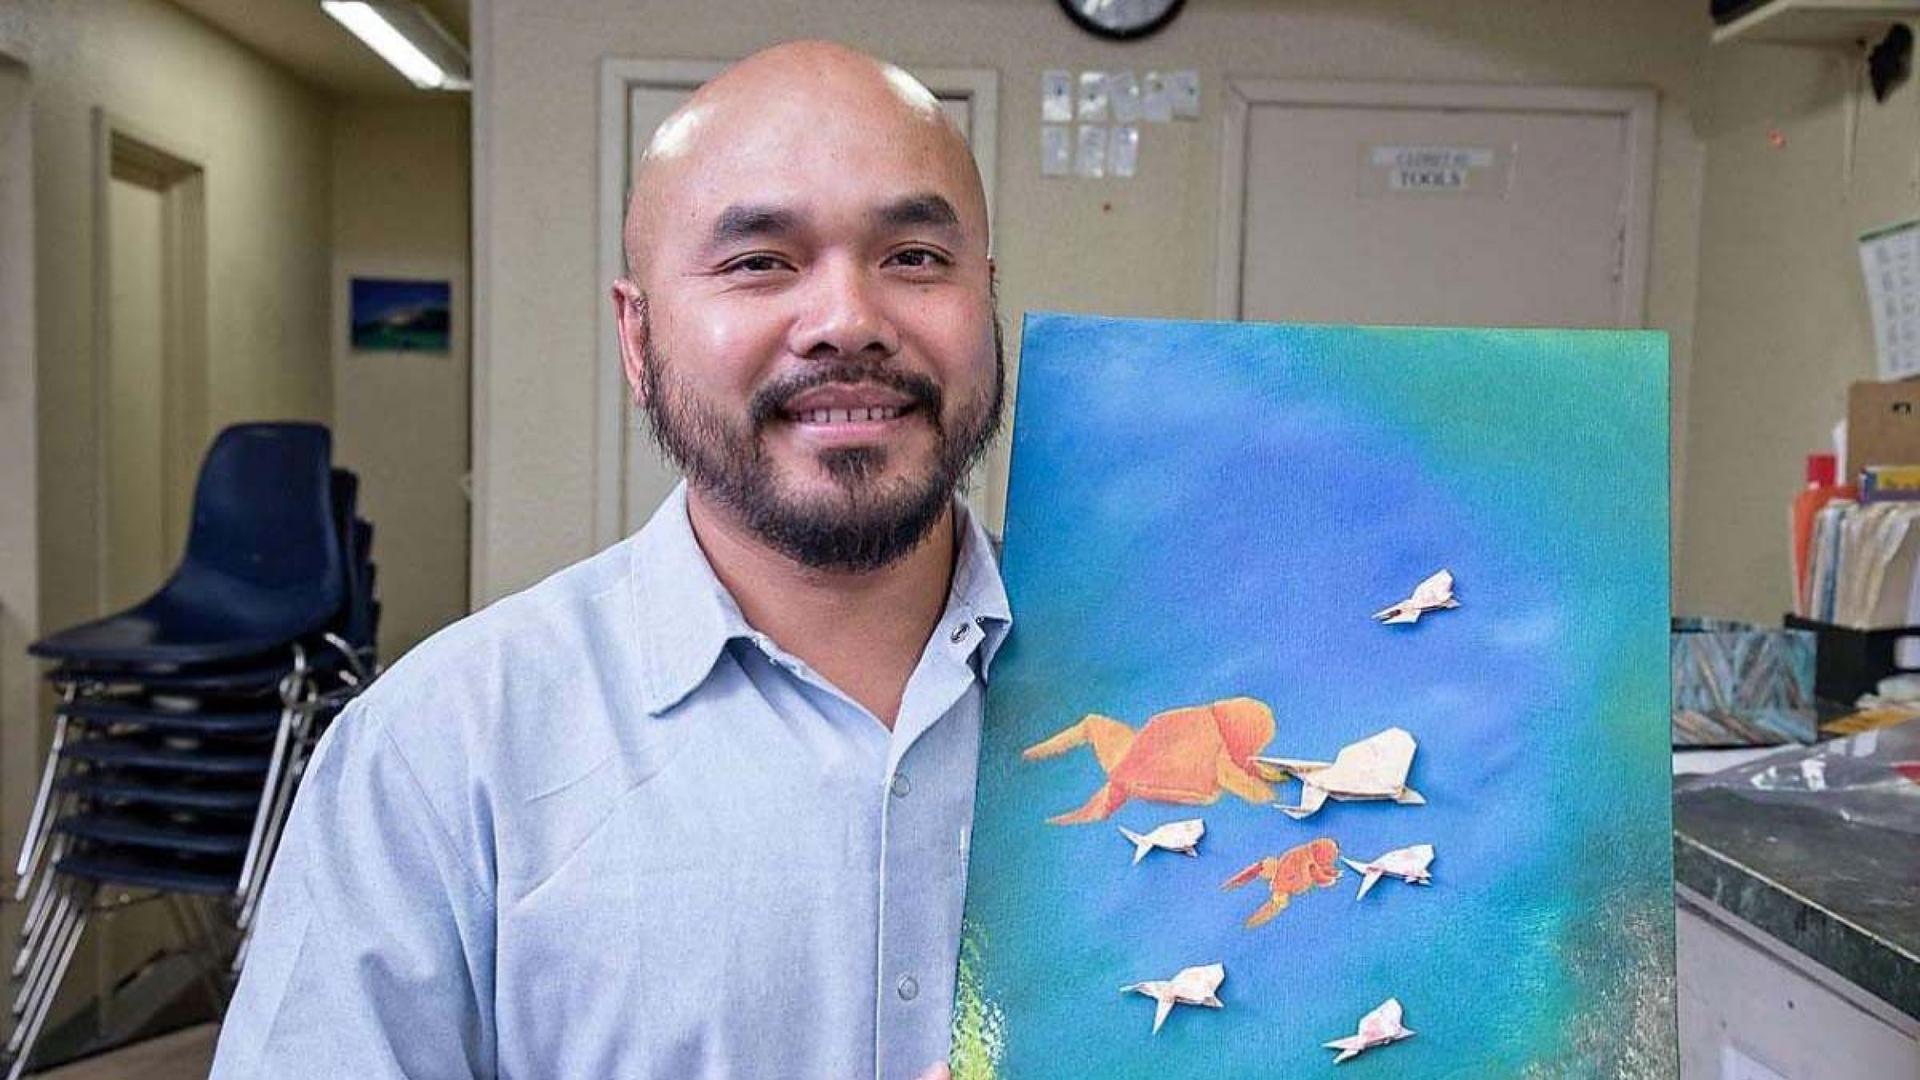 Chanthon Bun, who was incarcerated for 23 years, part of that time in San Quentin State Prison in California, shows artwork from an origami course offered in the prison.